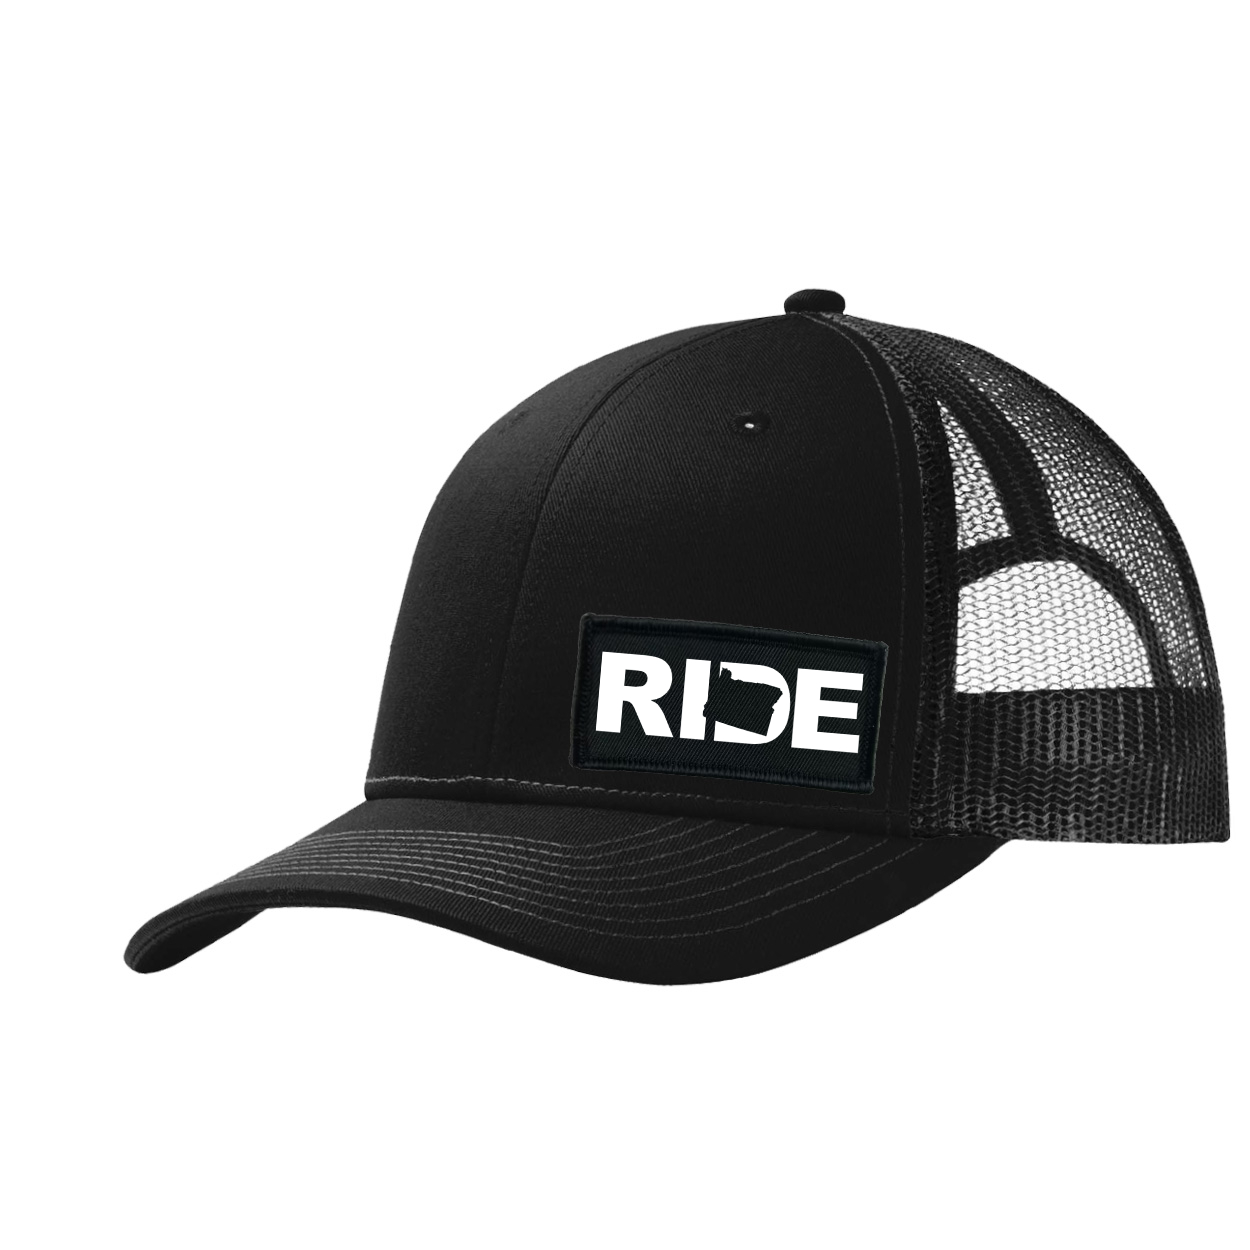 Ride Oregon Night Out Woven Patch Snapback Trucker Hat Black (White Logo)